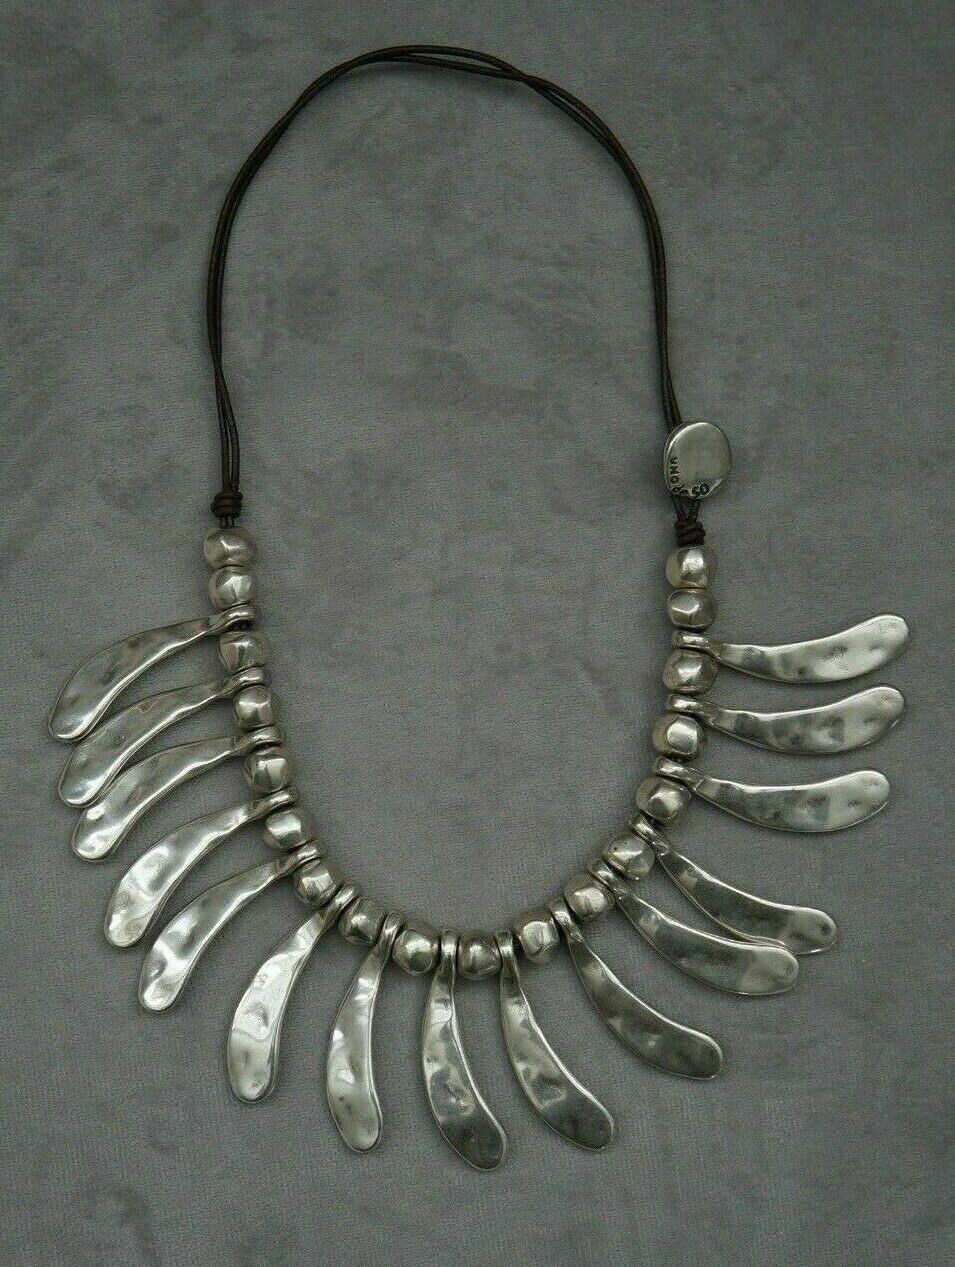 NEW Uno De 50 Stamped Silver Leather 16" Short Statement Necklace Choker - $145.00